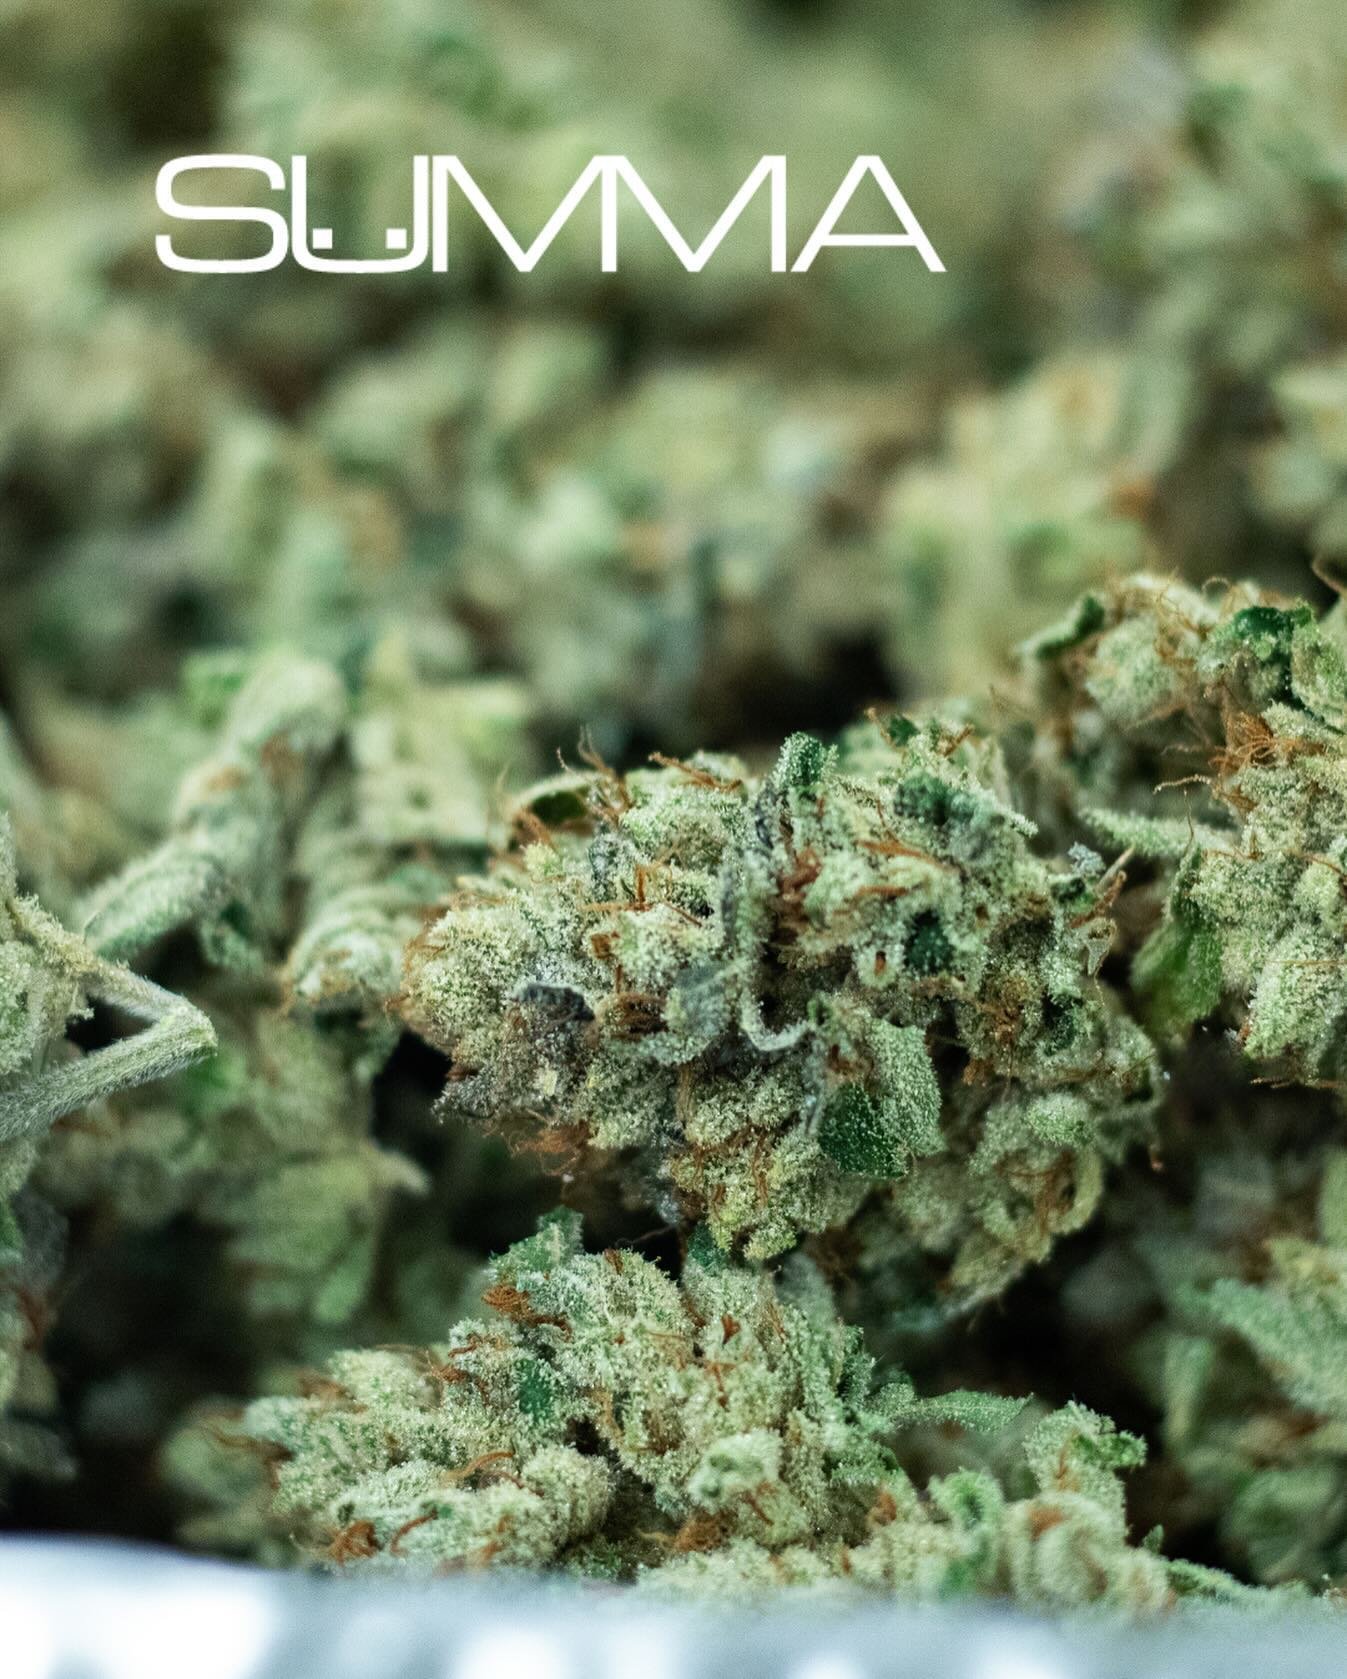 Tap ONCE to find Summa near you 📍
Tap TWICE to show us some love 💛⚡️

Keep out of reach of children. For use only by adults 21 years of age or older. Summa Cannabis NV ID: RC072. NFS. 

#chill #instarelax  #quality #lasvegas #nevada #lasvegaslocall